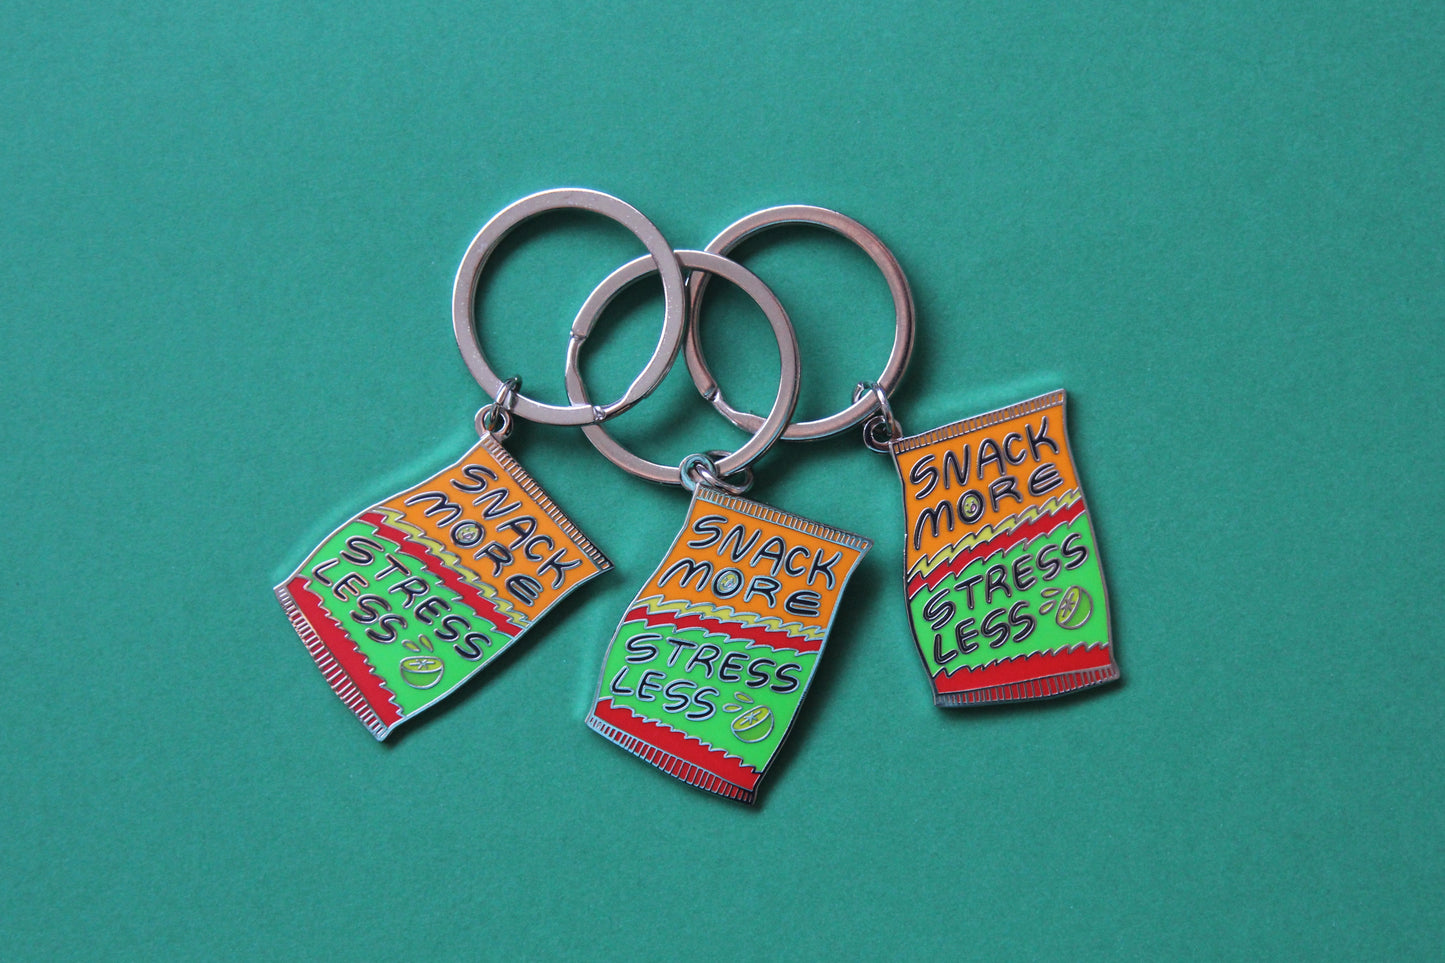 3 enamel keychains showing a chip bag that says "Snack More Stress Less" over a green background.